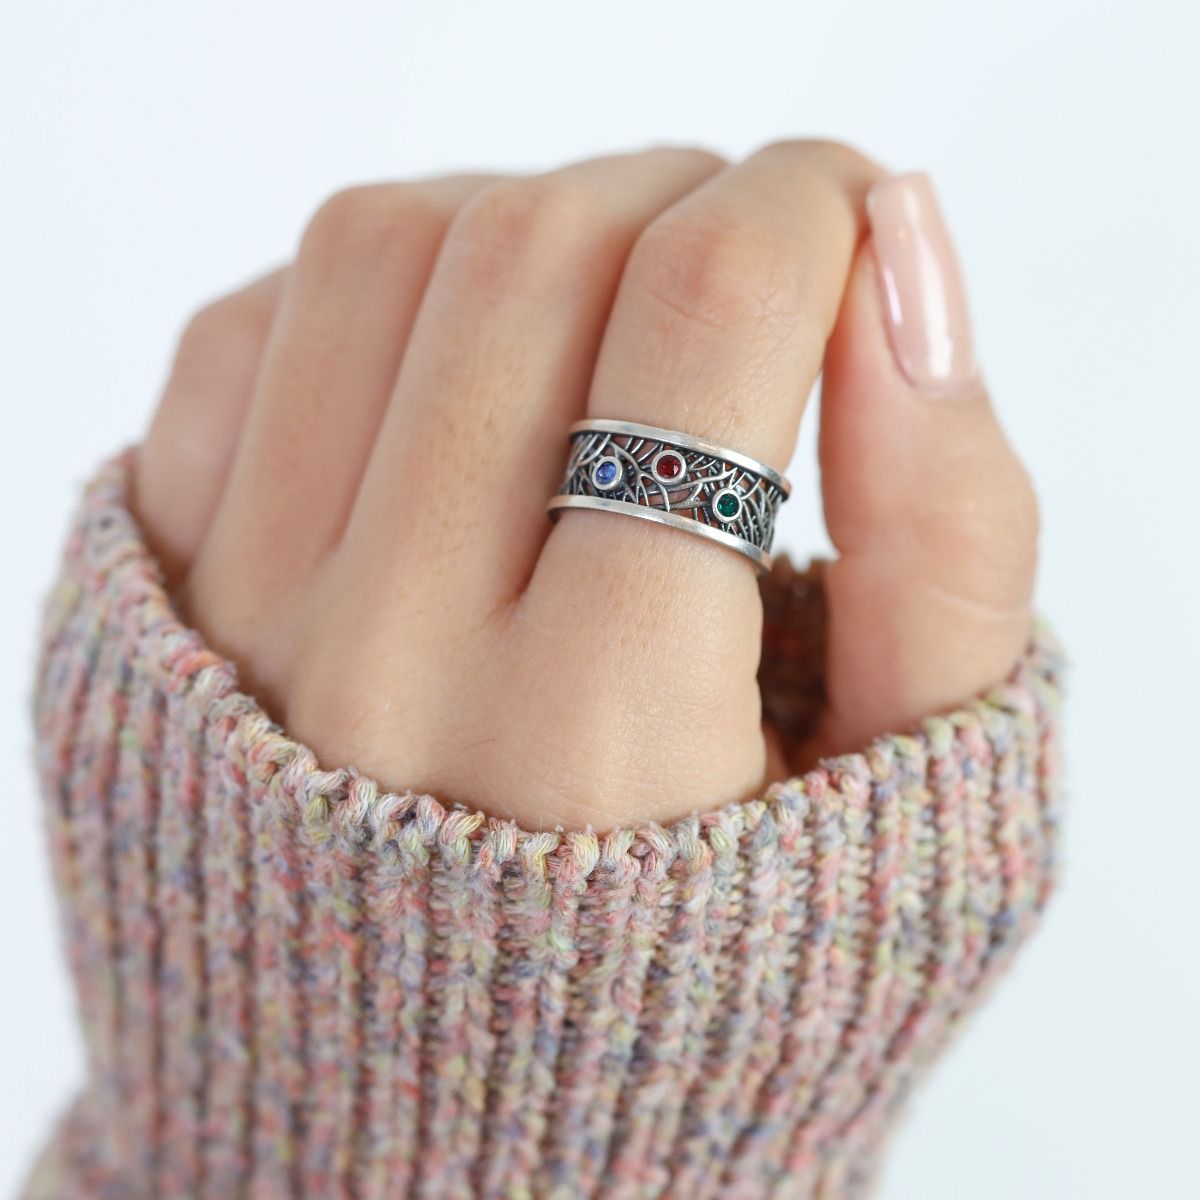 Stay cozy knowing your loved ones are always with you on this ring ❤️
.
.
.
#talisa #talisaconnect #talisajewelry #talisaring #birthstonering #birthstonejewelry #customring #customjewelry #birthstones #giving #love #familylove #family